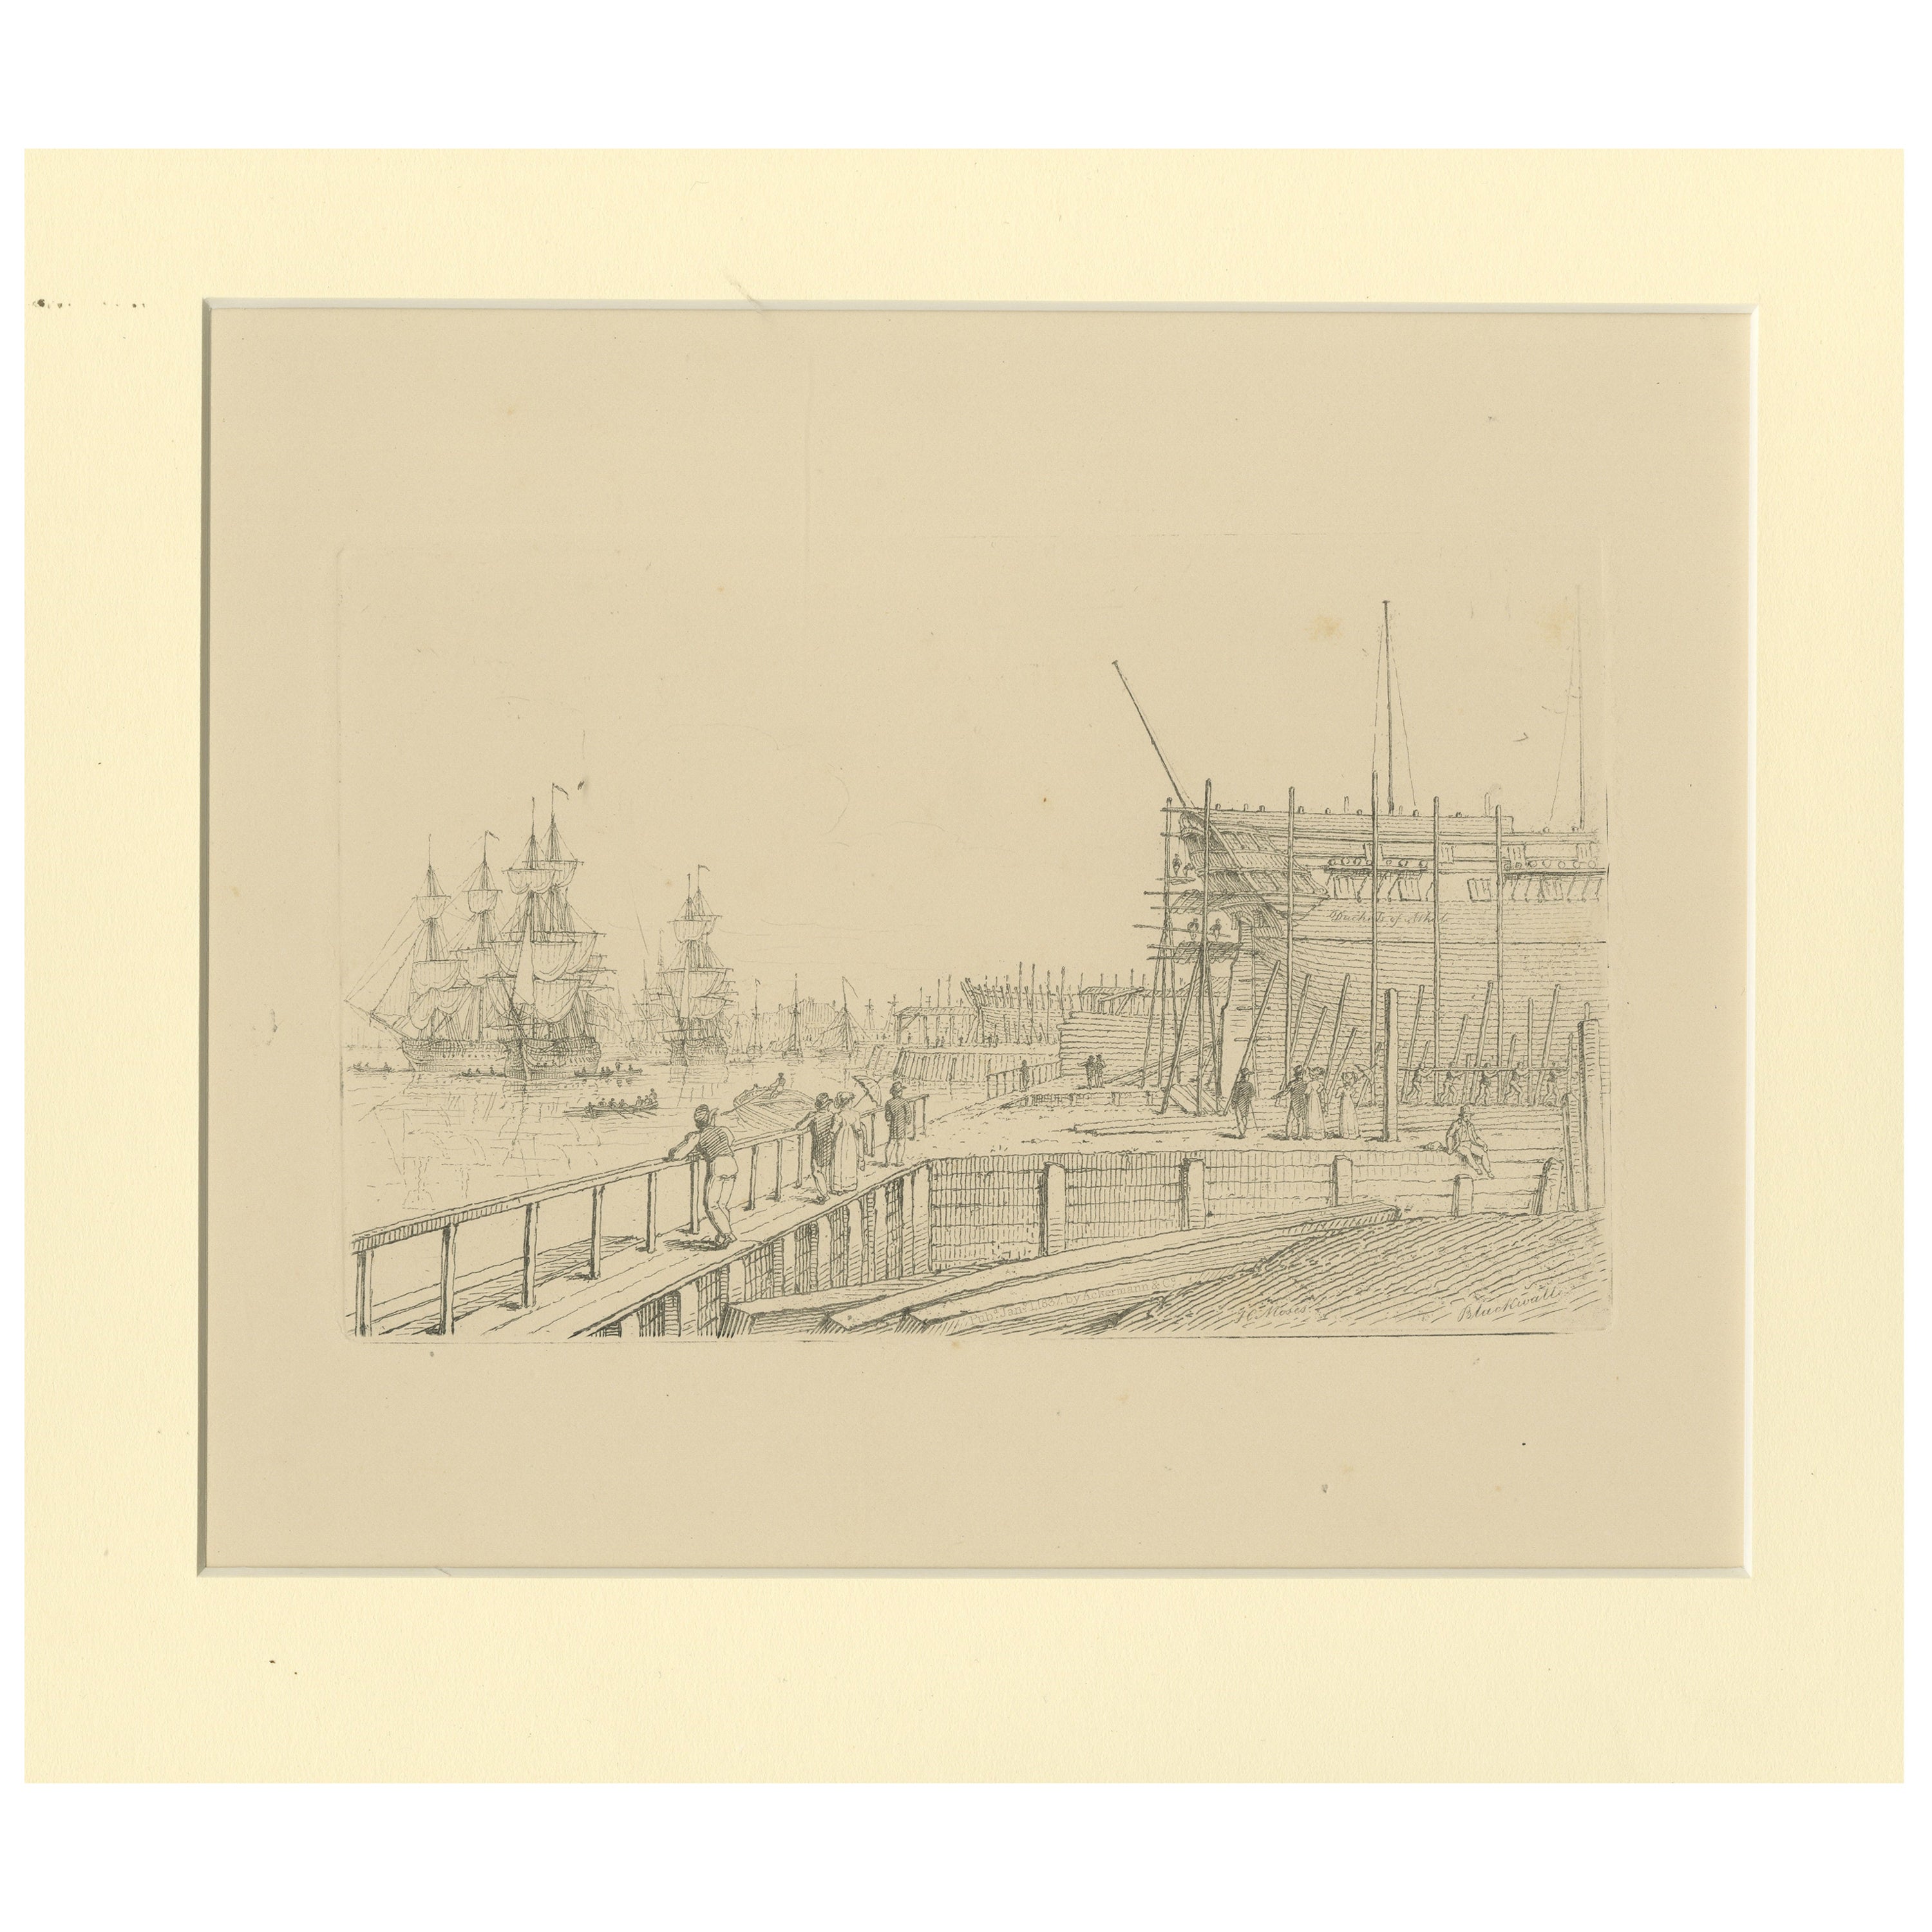 Antique Master Print with a Marine View 'Blackwall'